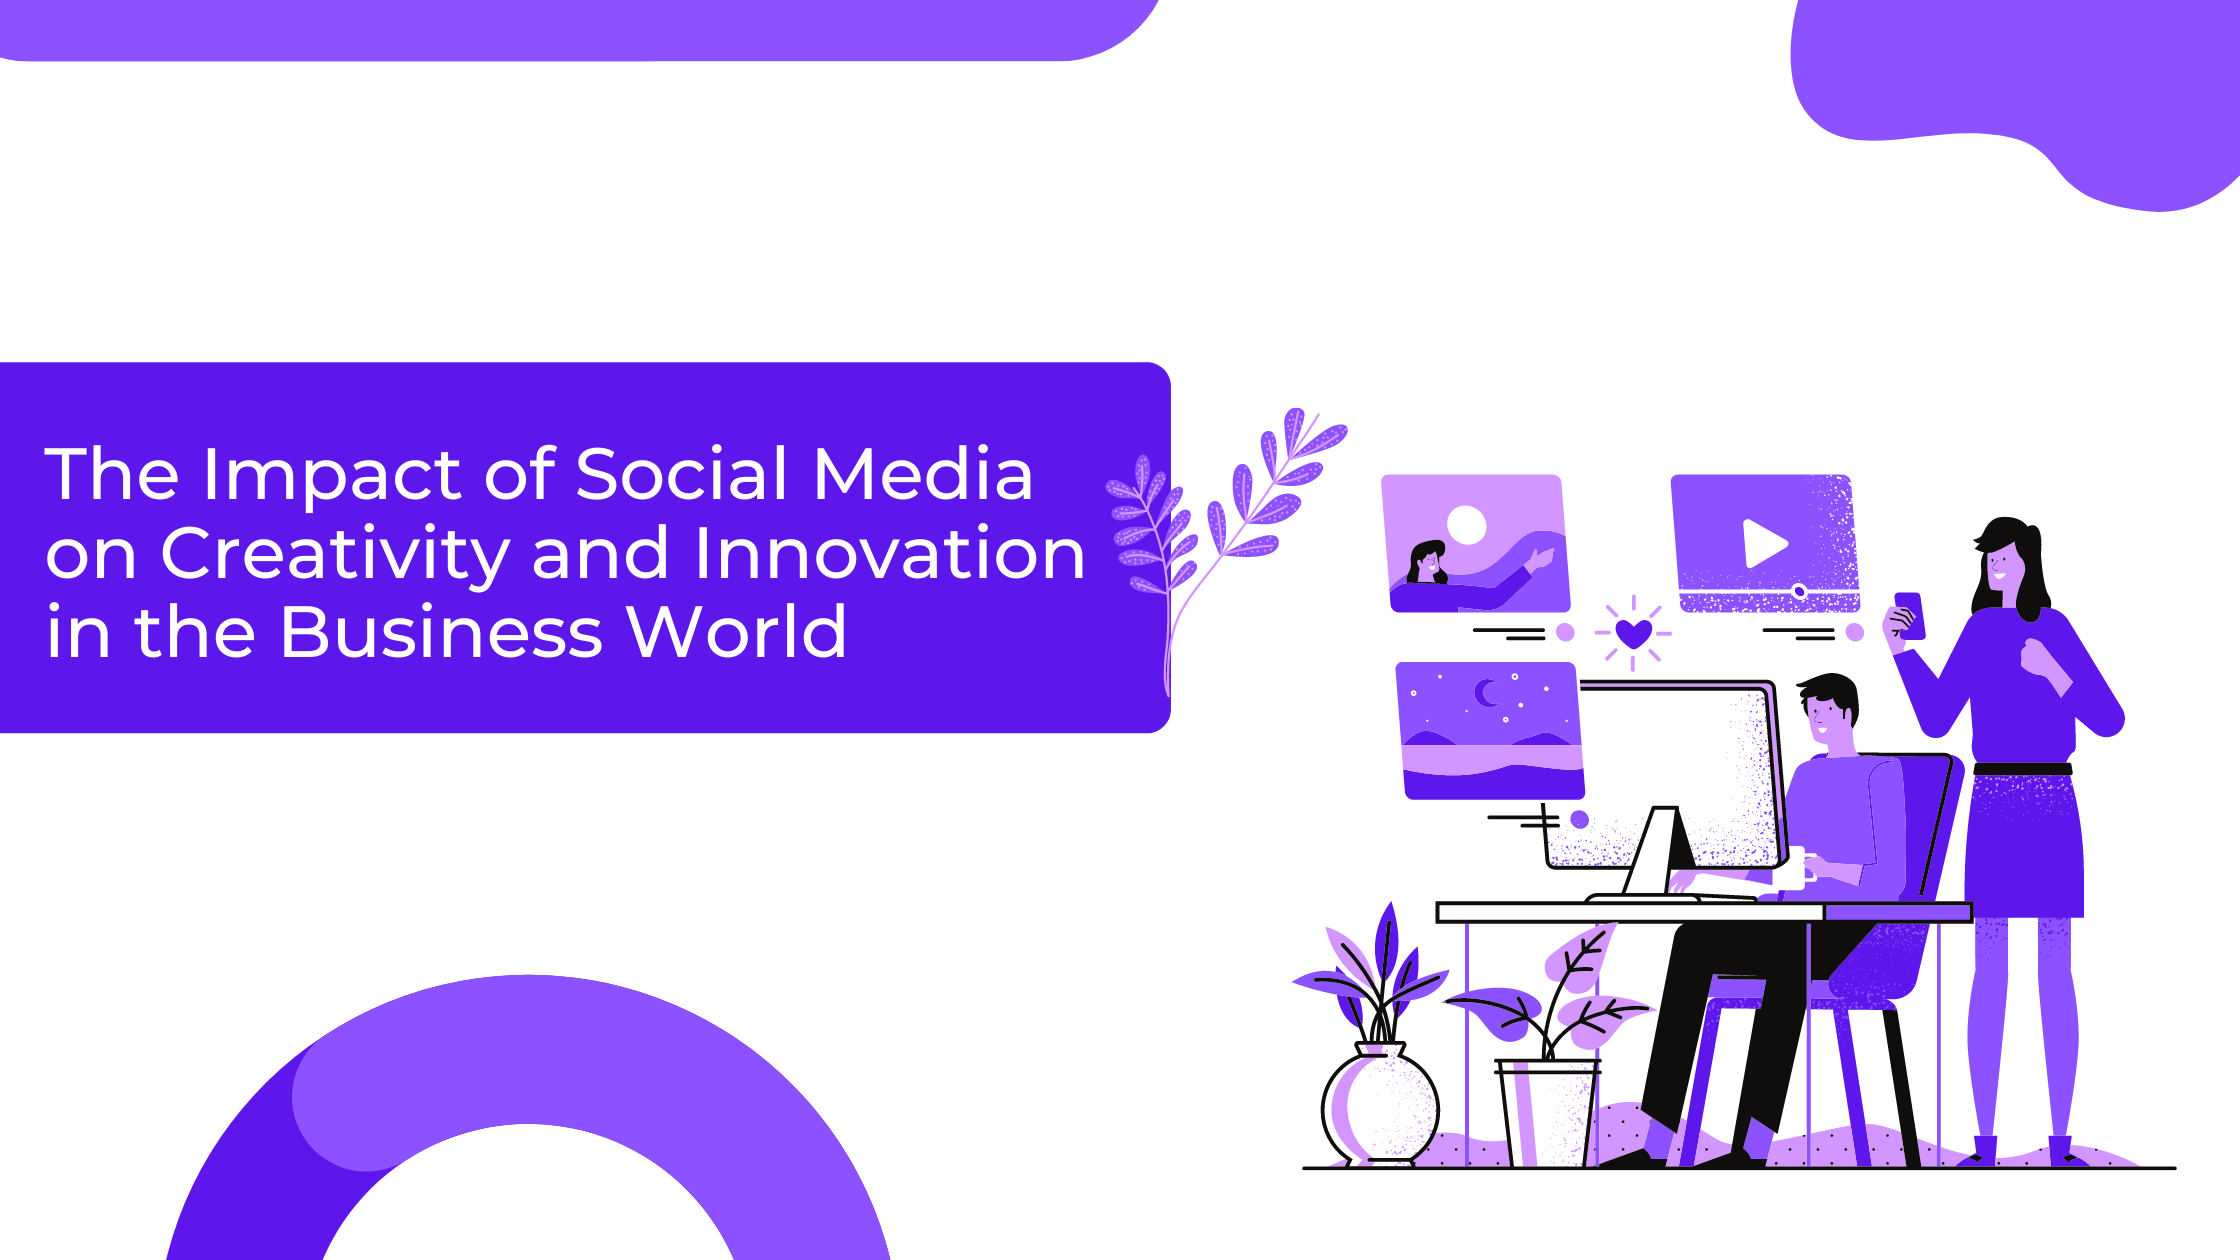 The Impact of Social Media on Creativity and Innovation in the Business World